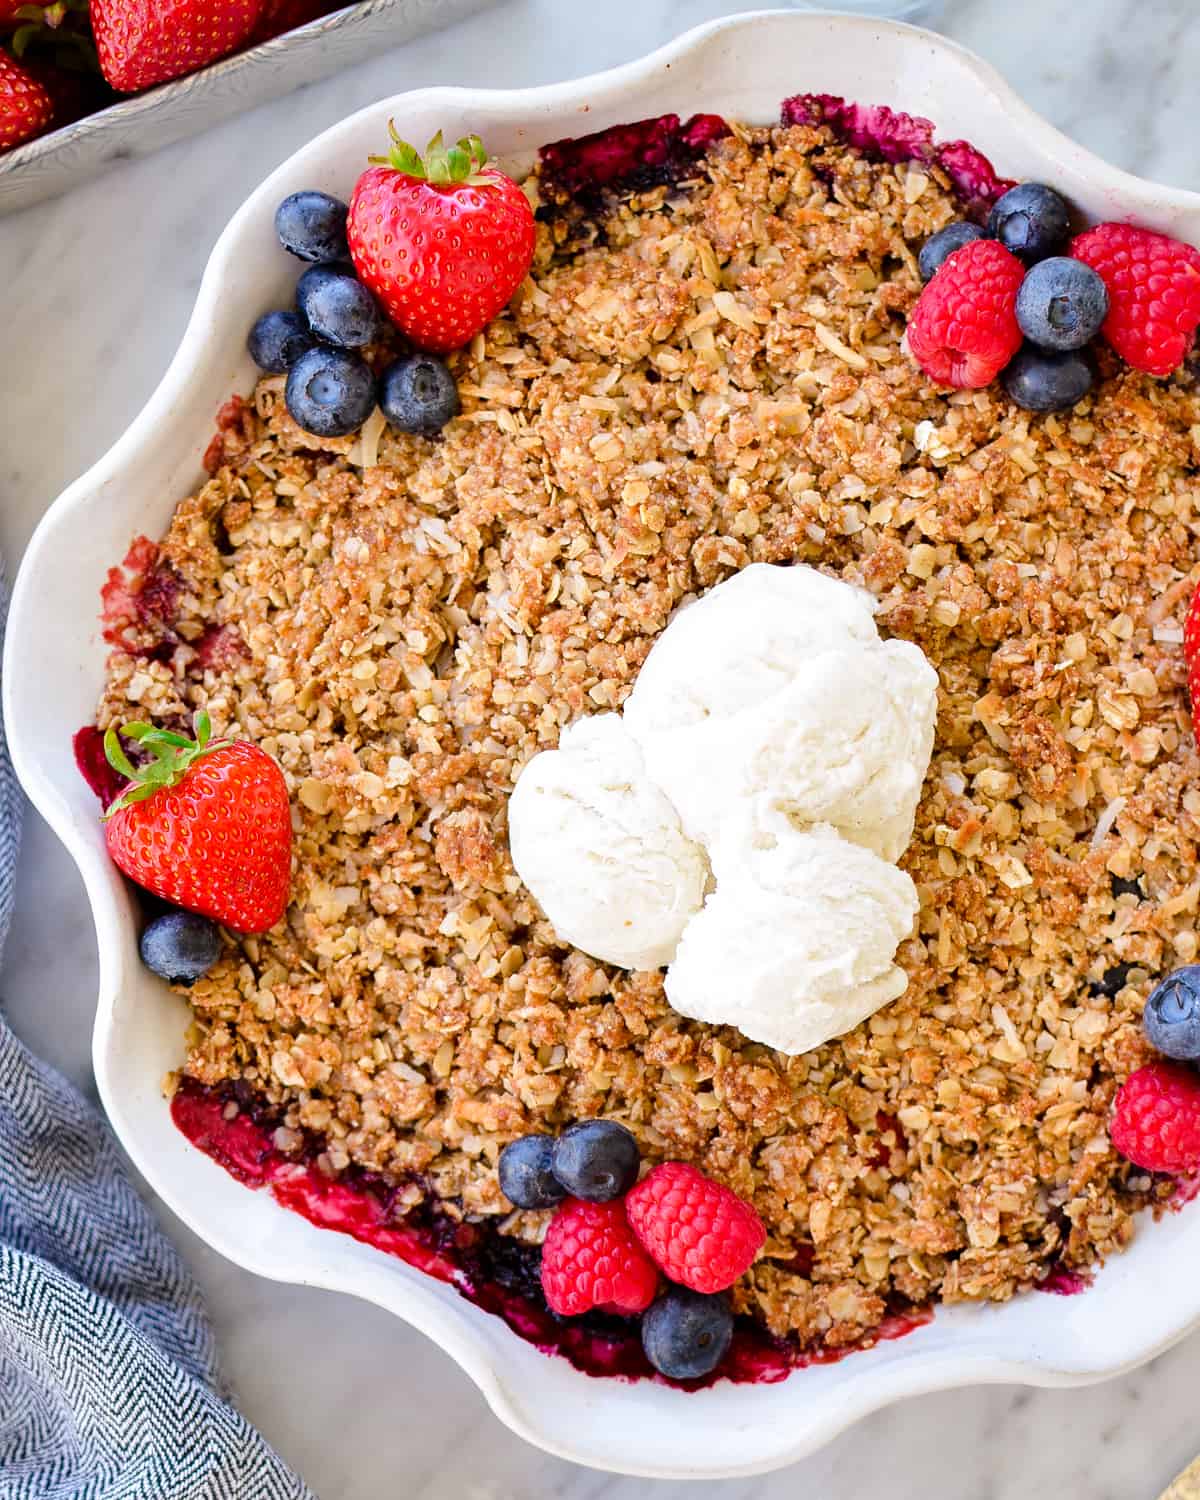 Overhead view of Healthy Berry Crisp Recipe garnished with fresh berries and vanilla ice cream